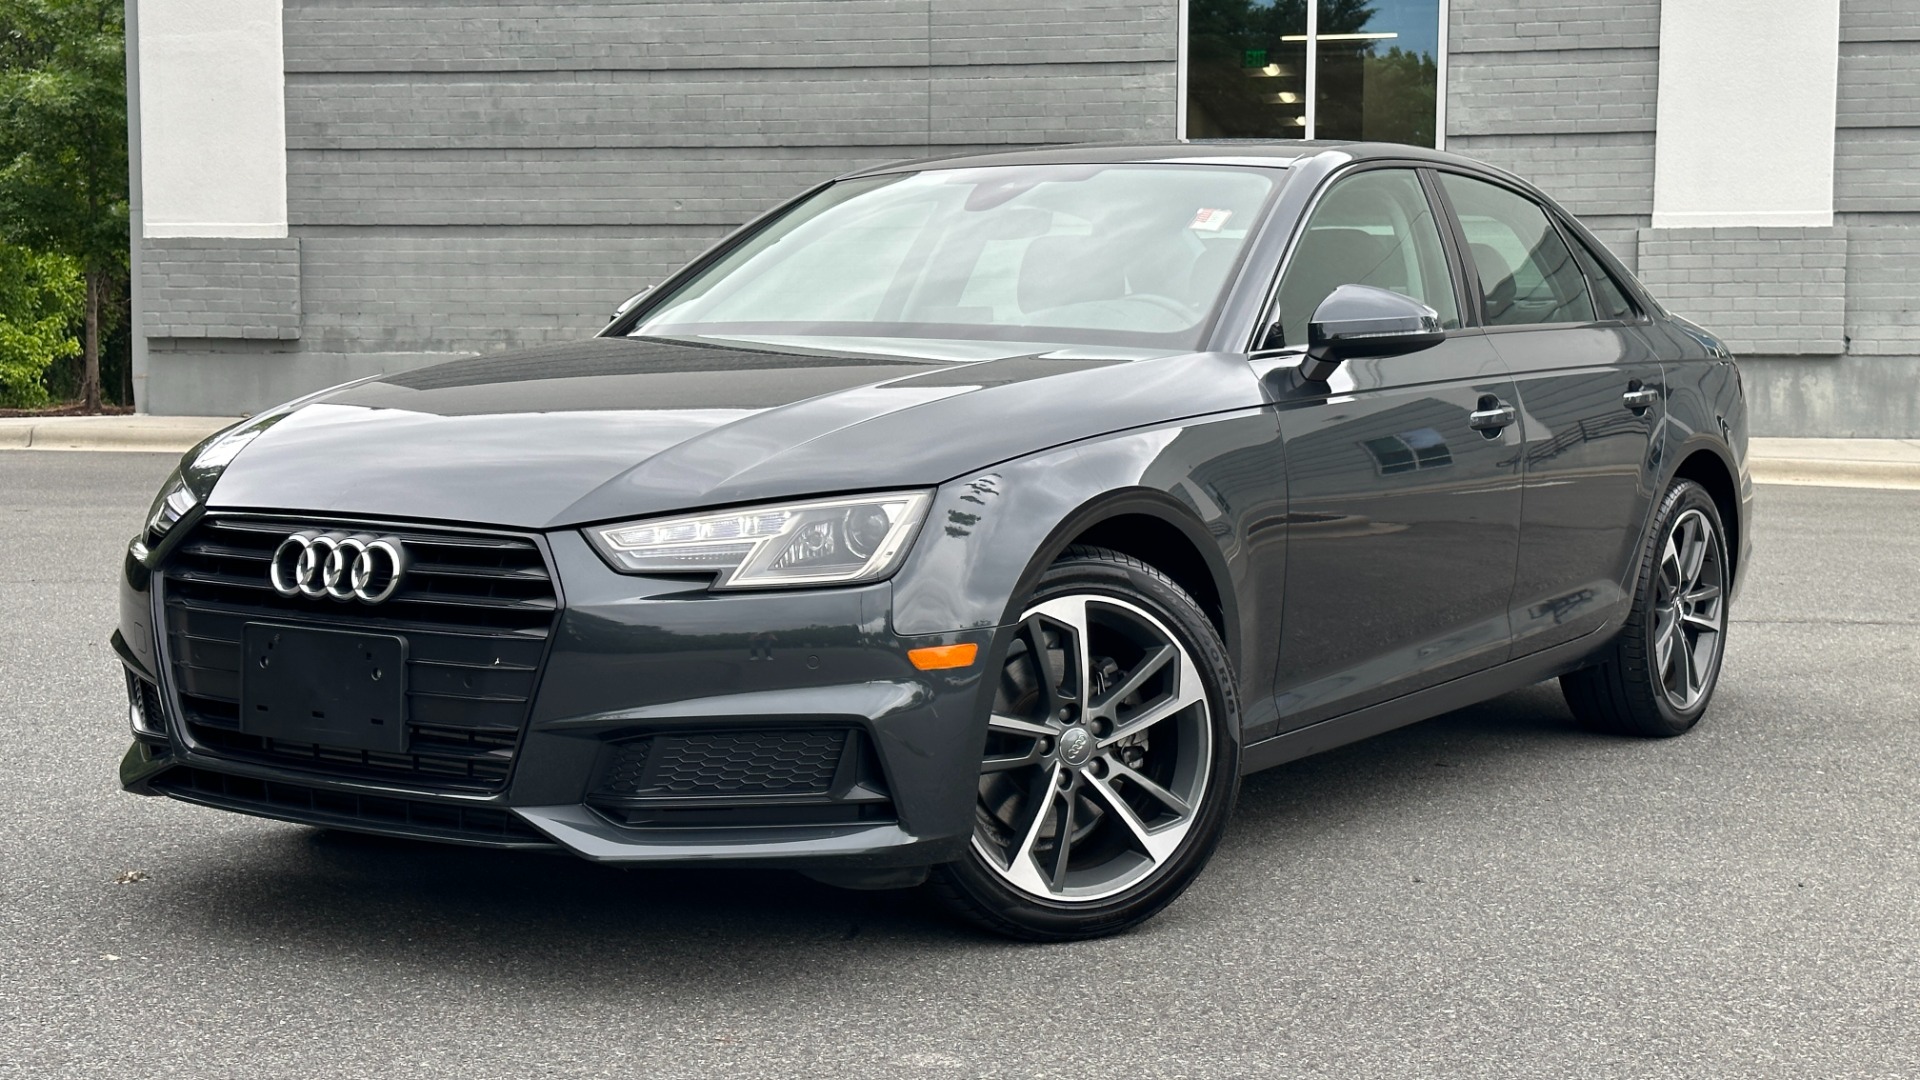 Used 2019 Audi A4 PREMIUM / AUDI BEAM RINGS / AUDI GUARD / LEATHER for sale $28,250 at Formula Imports in Charlotte NC 28227 39